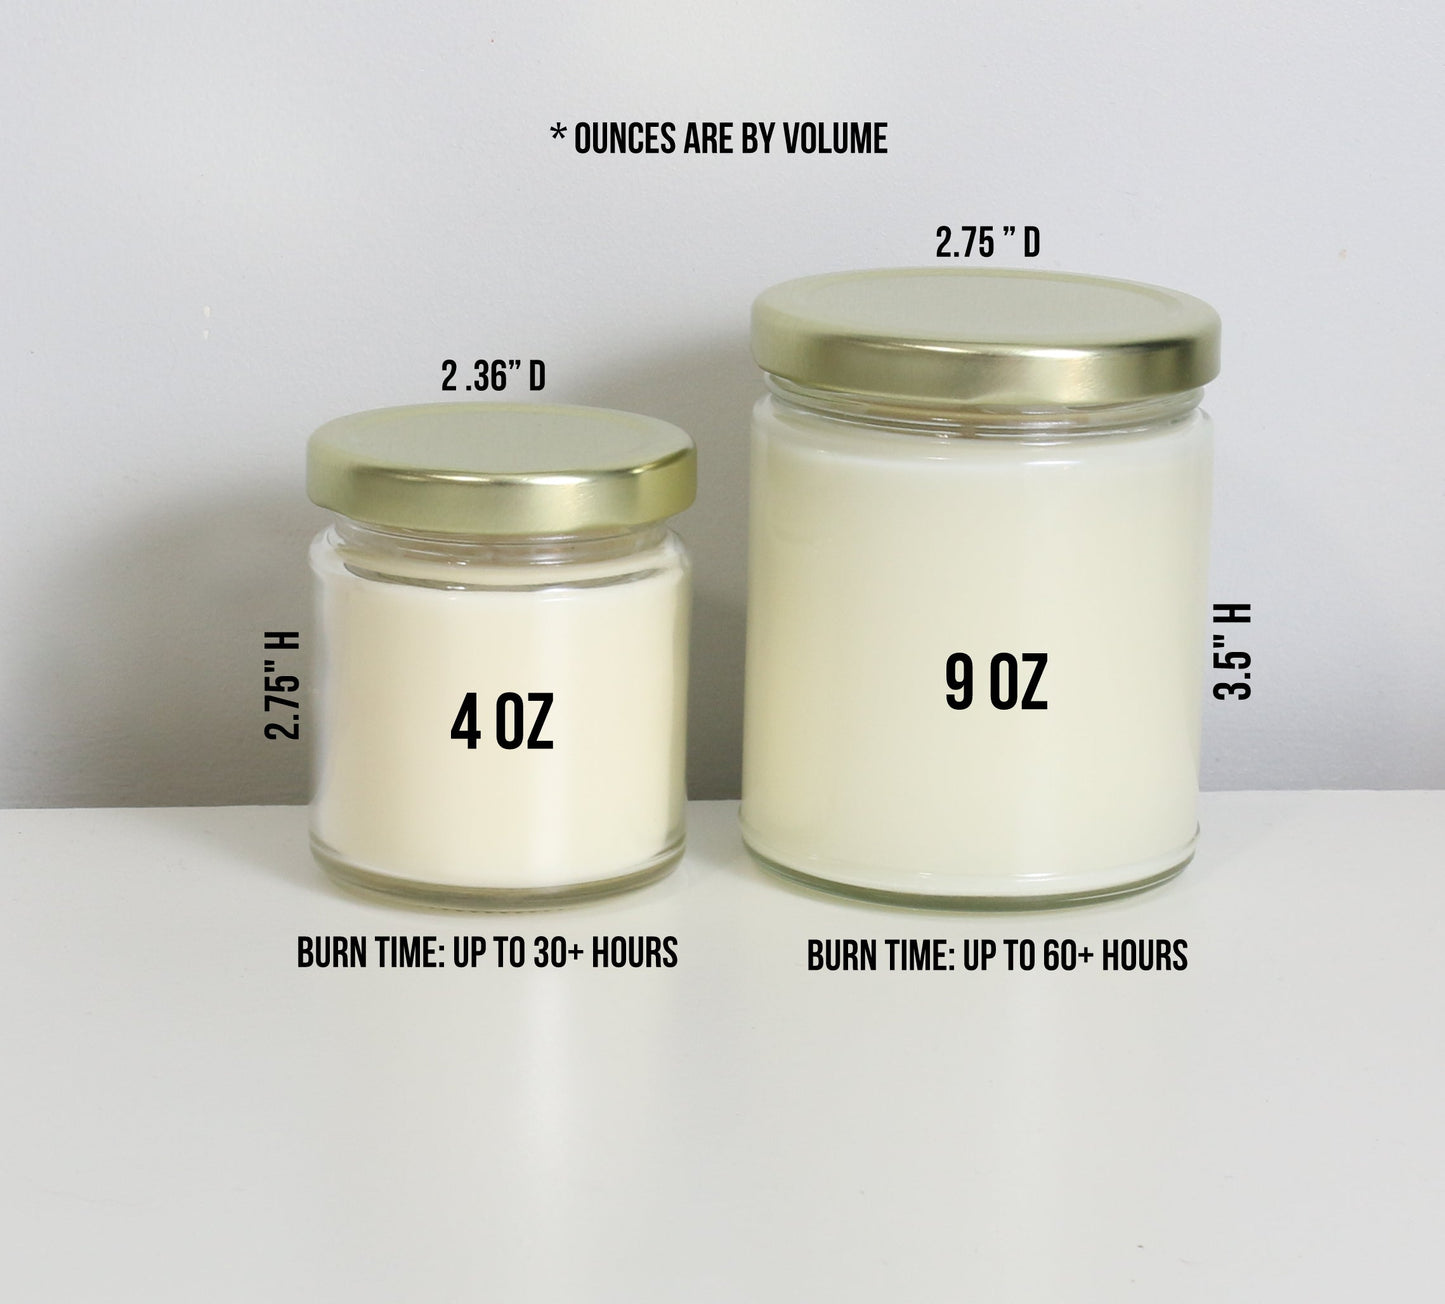 Look At You Getting Married And Shit Soy Candle - Choose Your Scent - Wedding Announcement